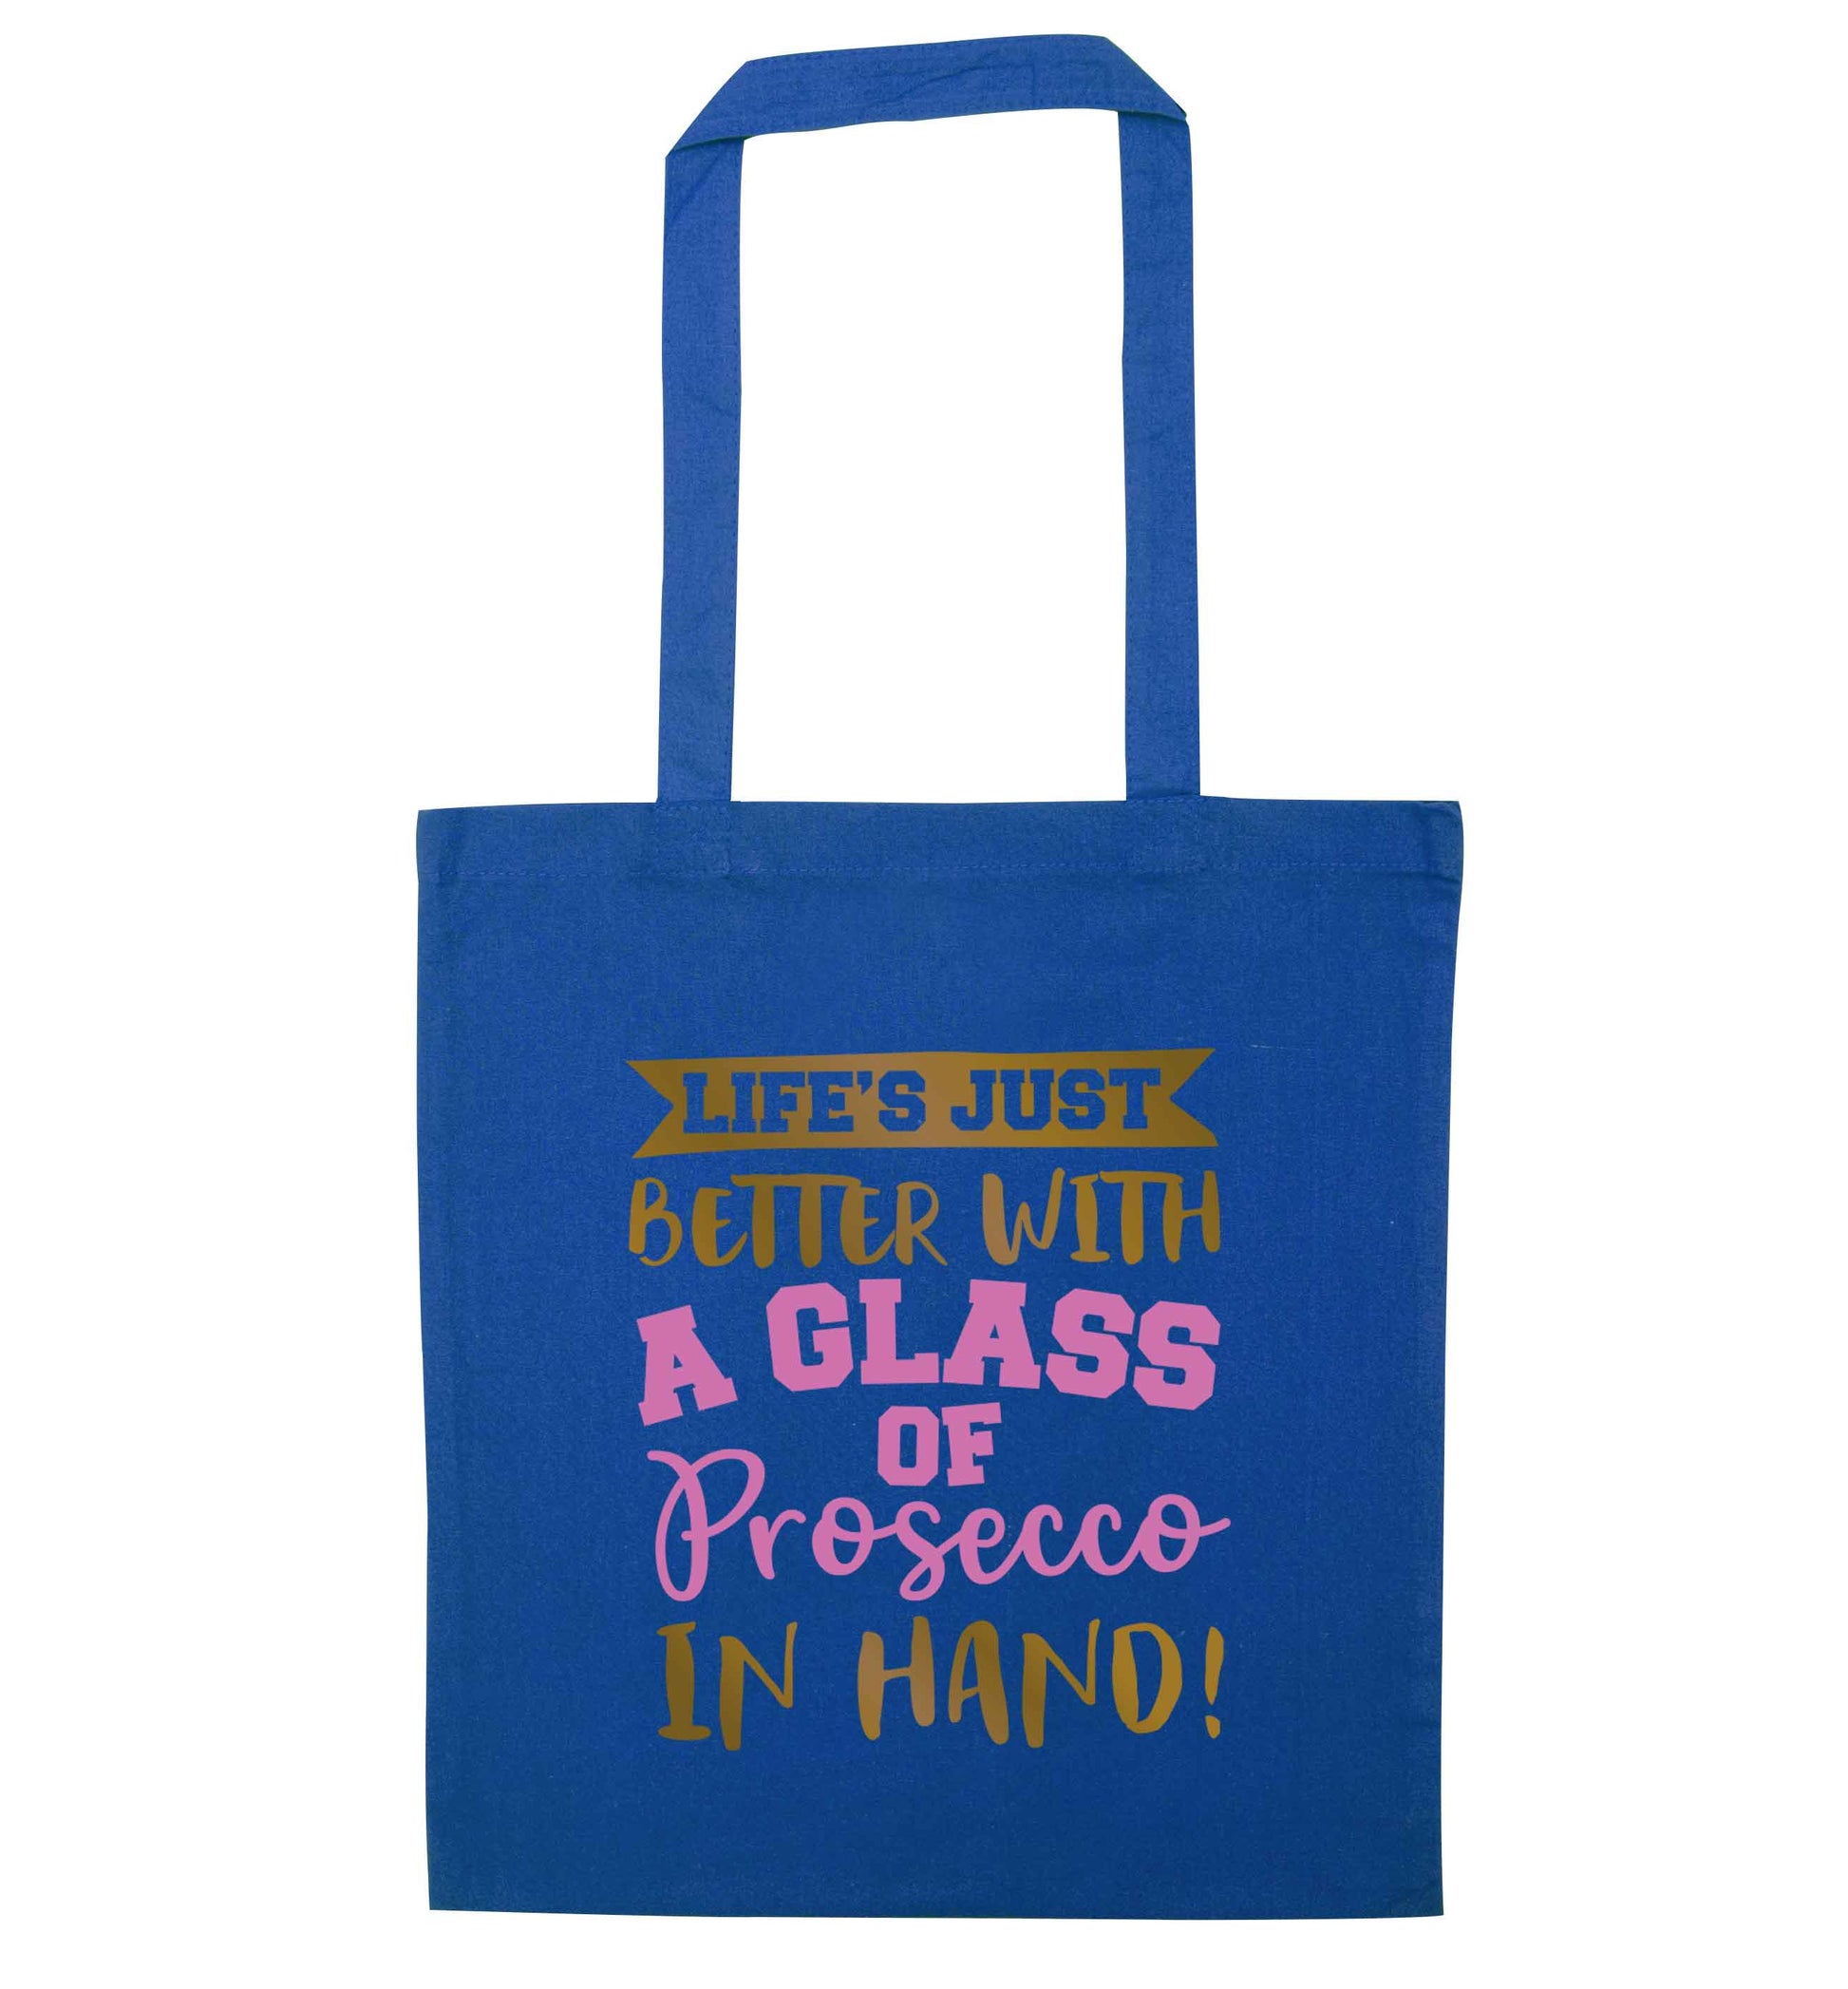 Life's just better with a glass of prosecco in hand blue tote bag